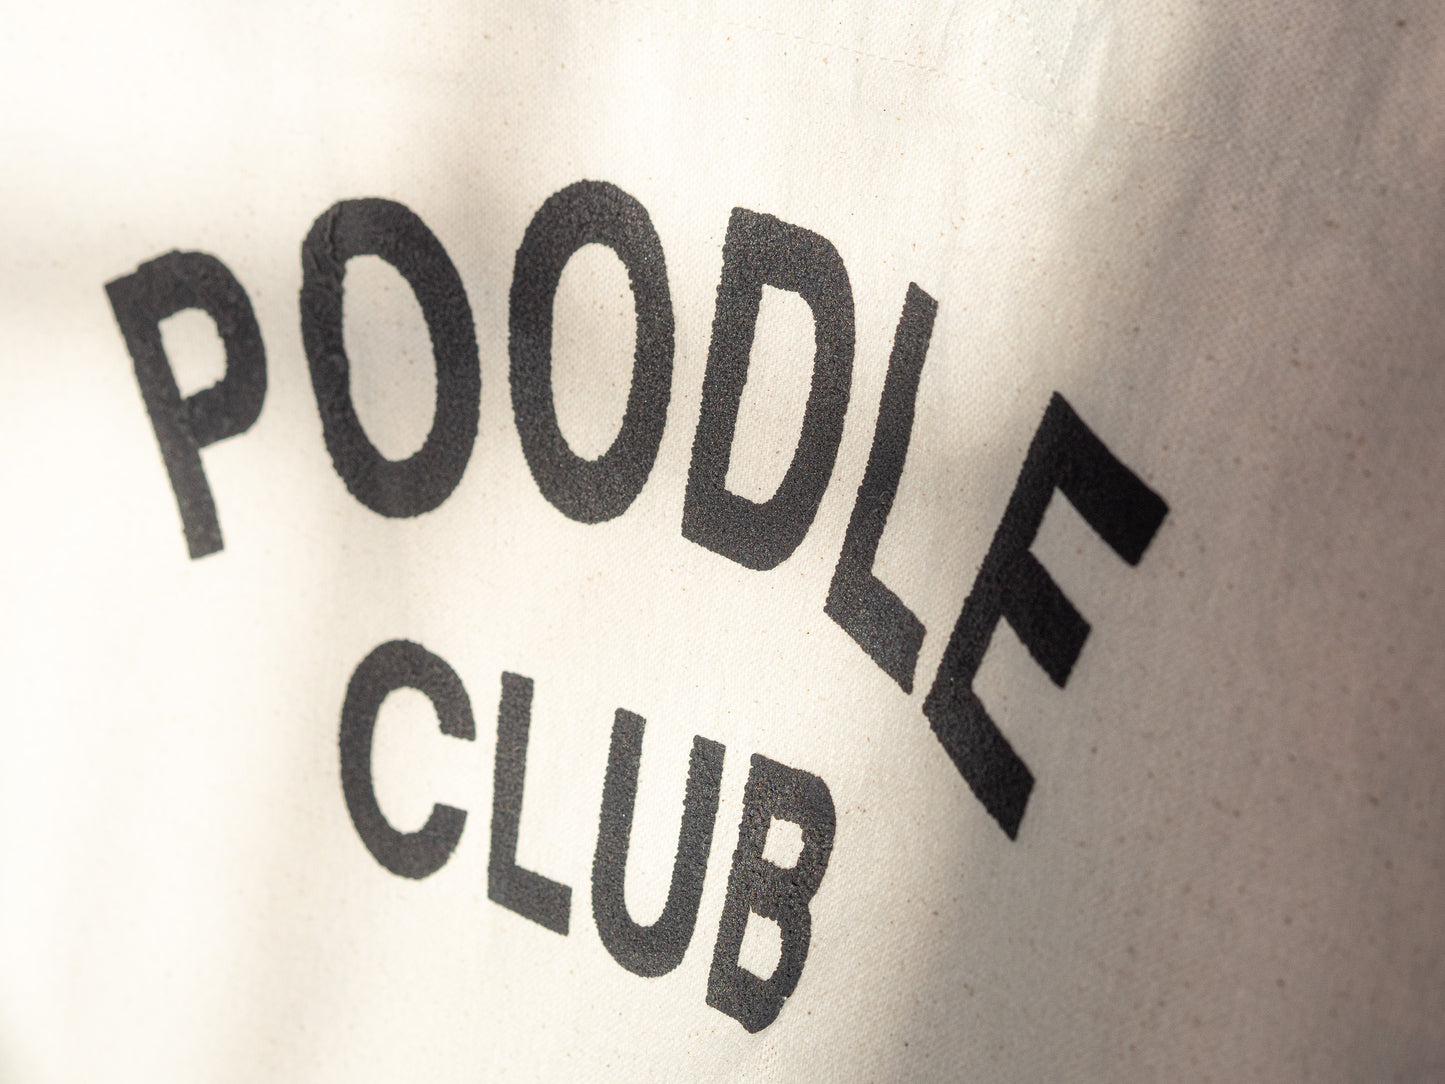 Poodle Supply "POODLE CLUB" Heavy Canvas Tote Bag - Natural White / Black